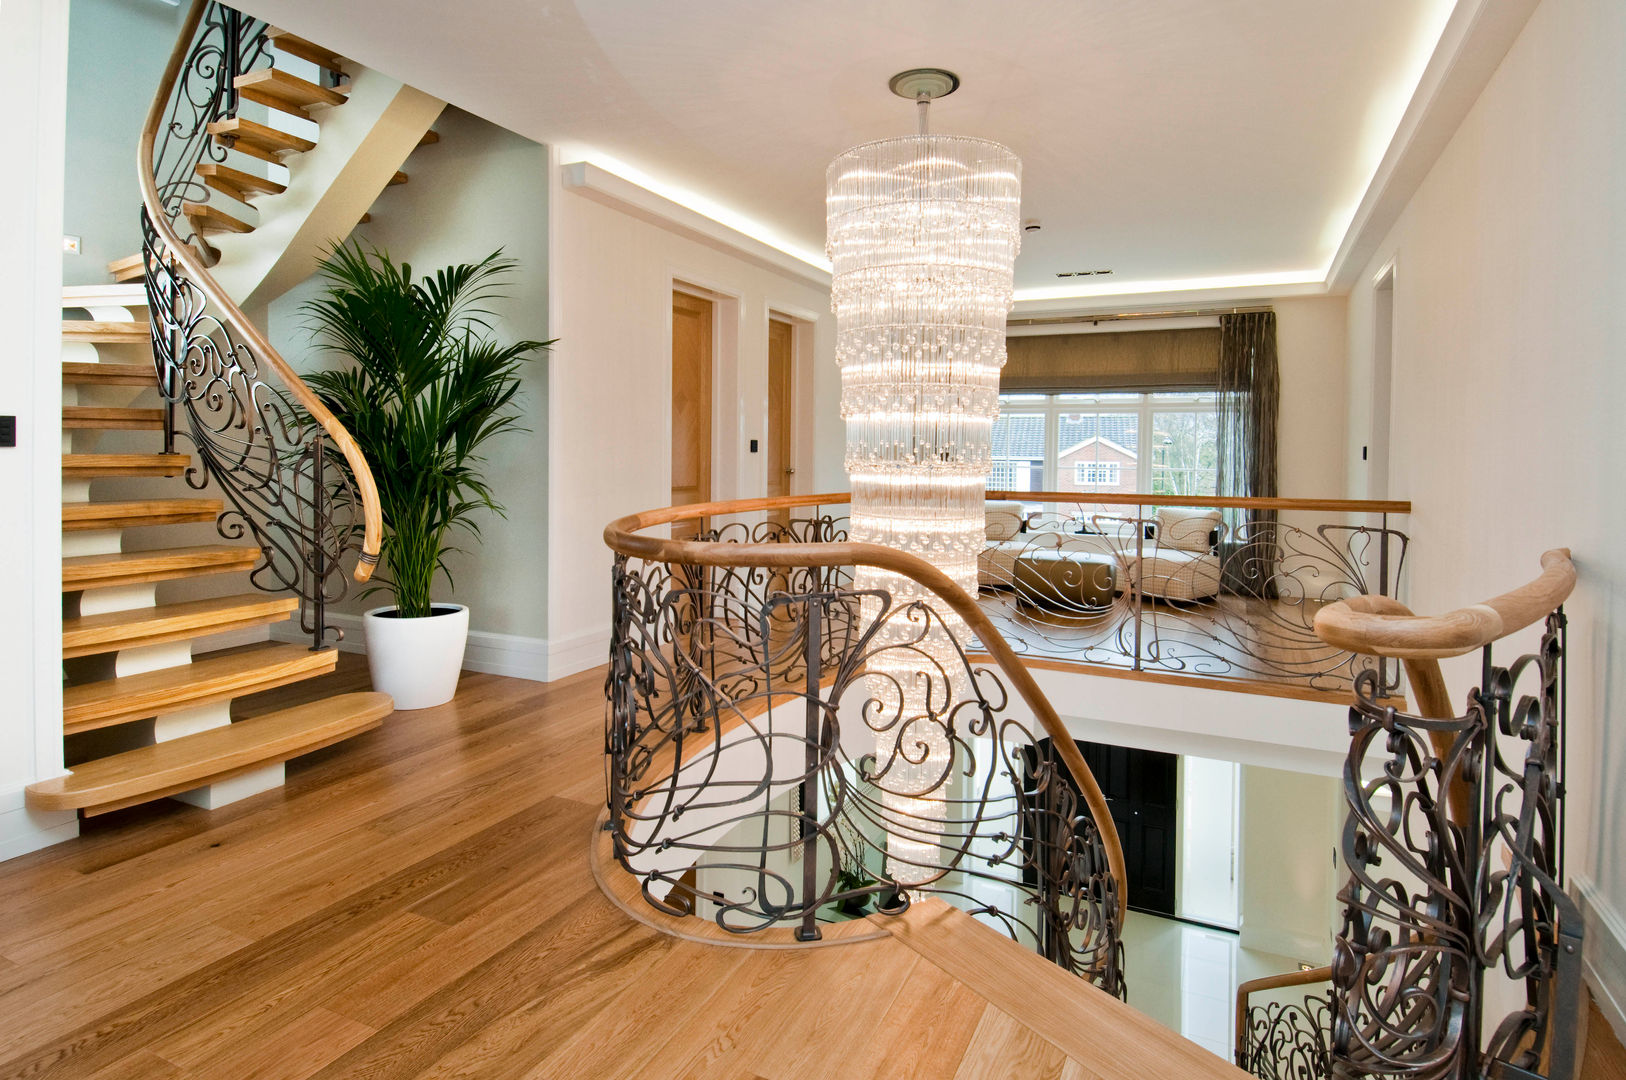 BESPOKE CHANDELIER AND STAIRCASE Shandler Homes Ltd Modern Corridor, Hallway and Staircase